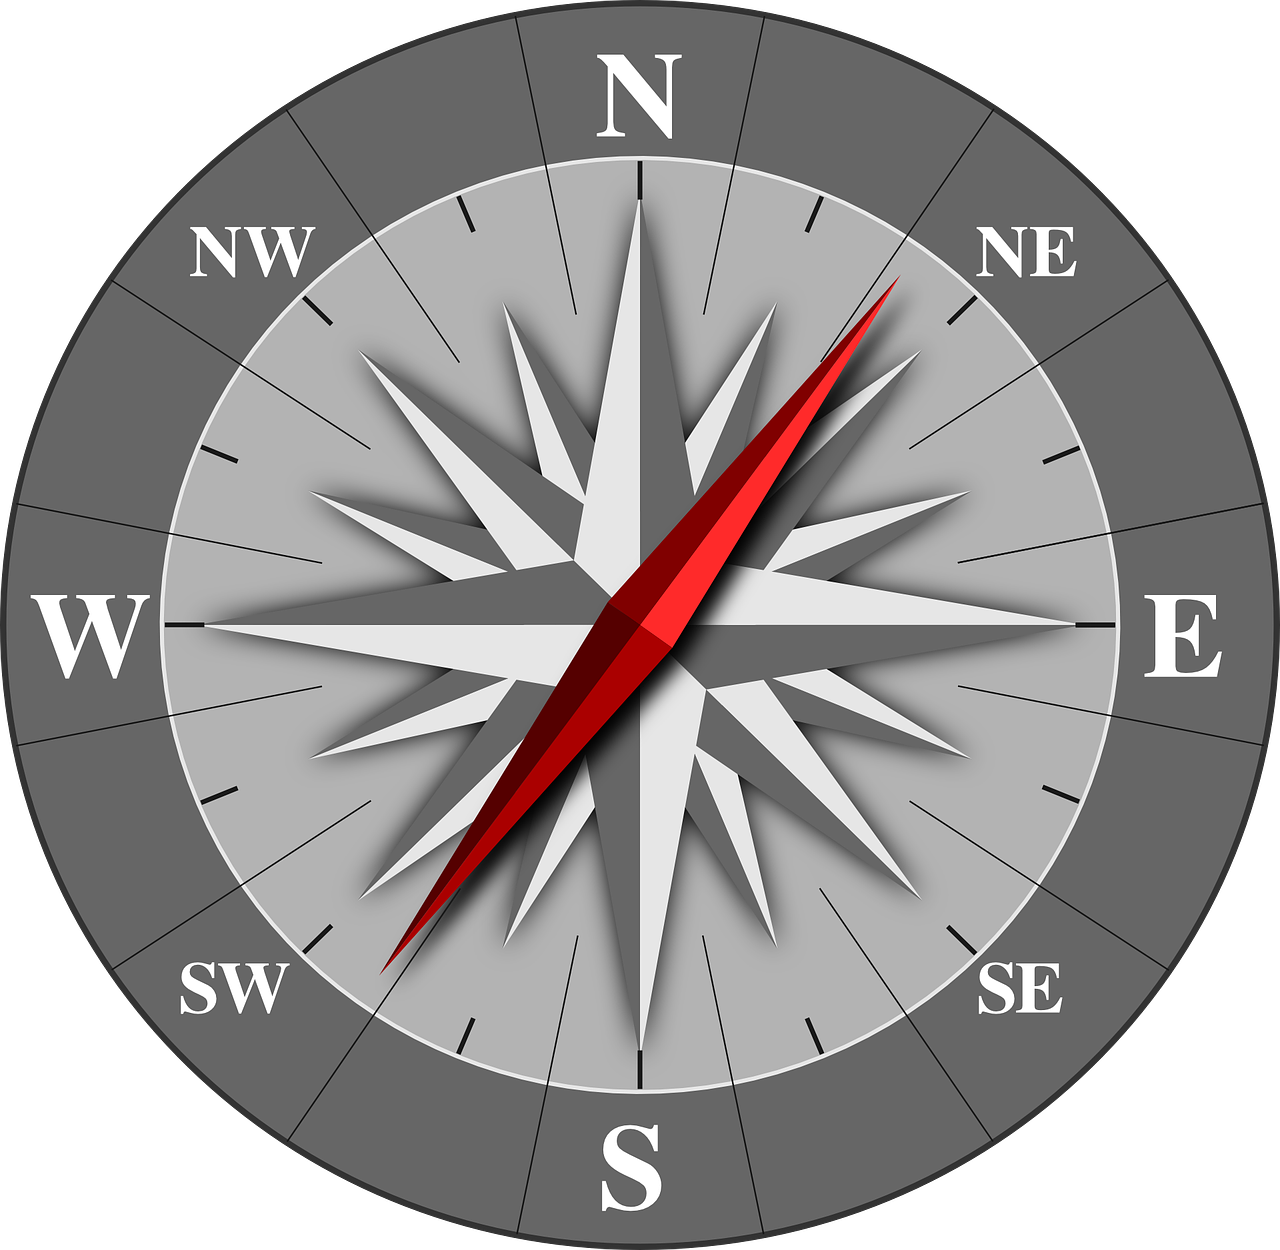 compass rose wind direction free photo